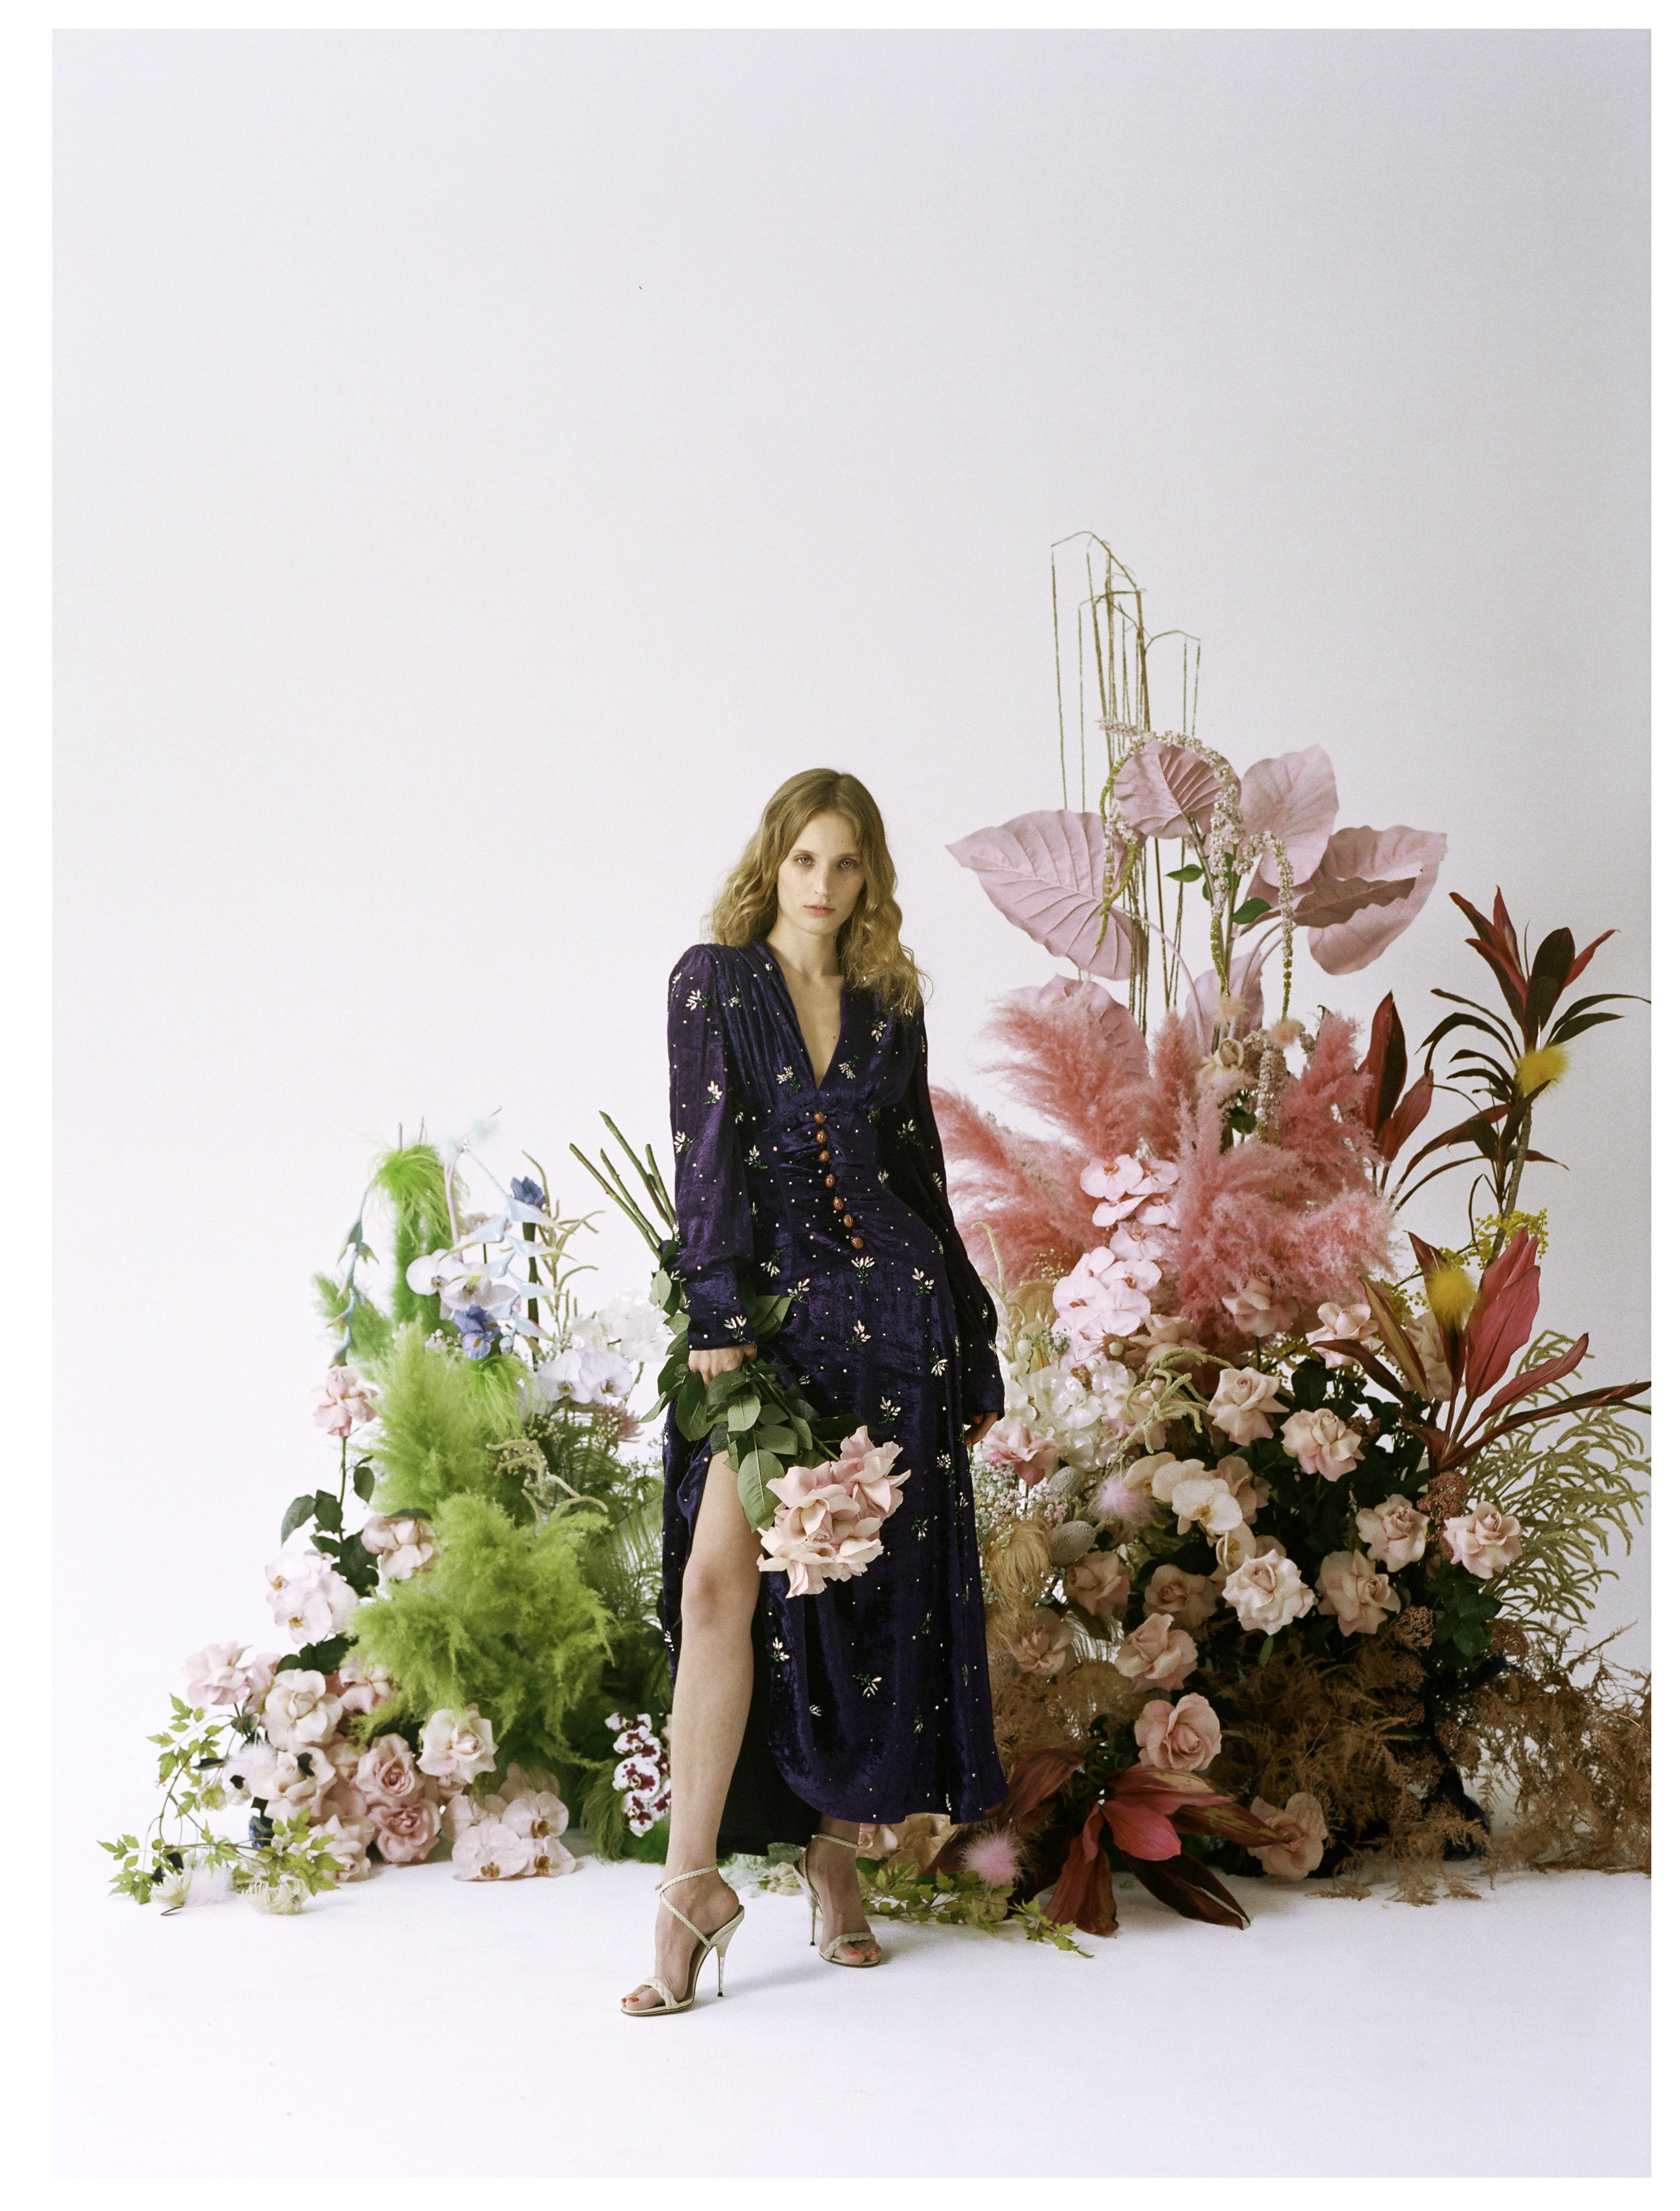 PETRA COLLINS IN GUCCI. BEHIND COLLINS IS A “FANTASY GARDEN” BY ARTIST BRITTANY ASCH.